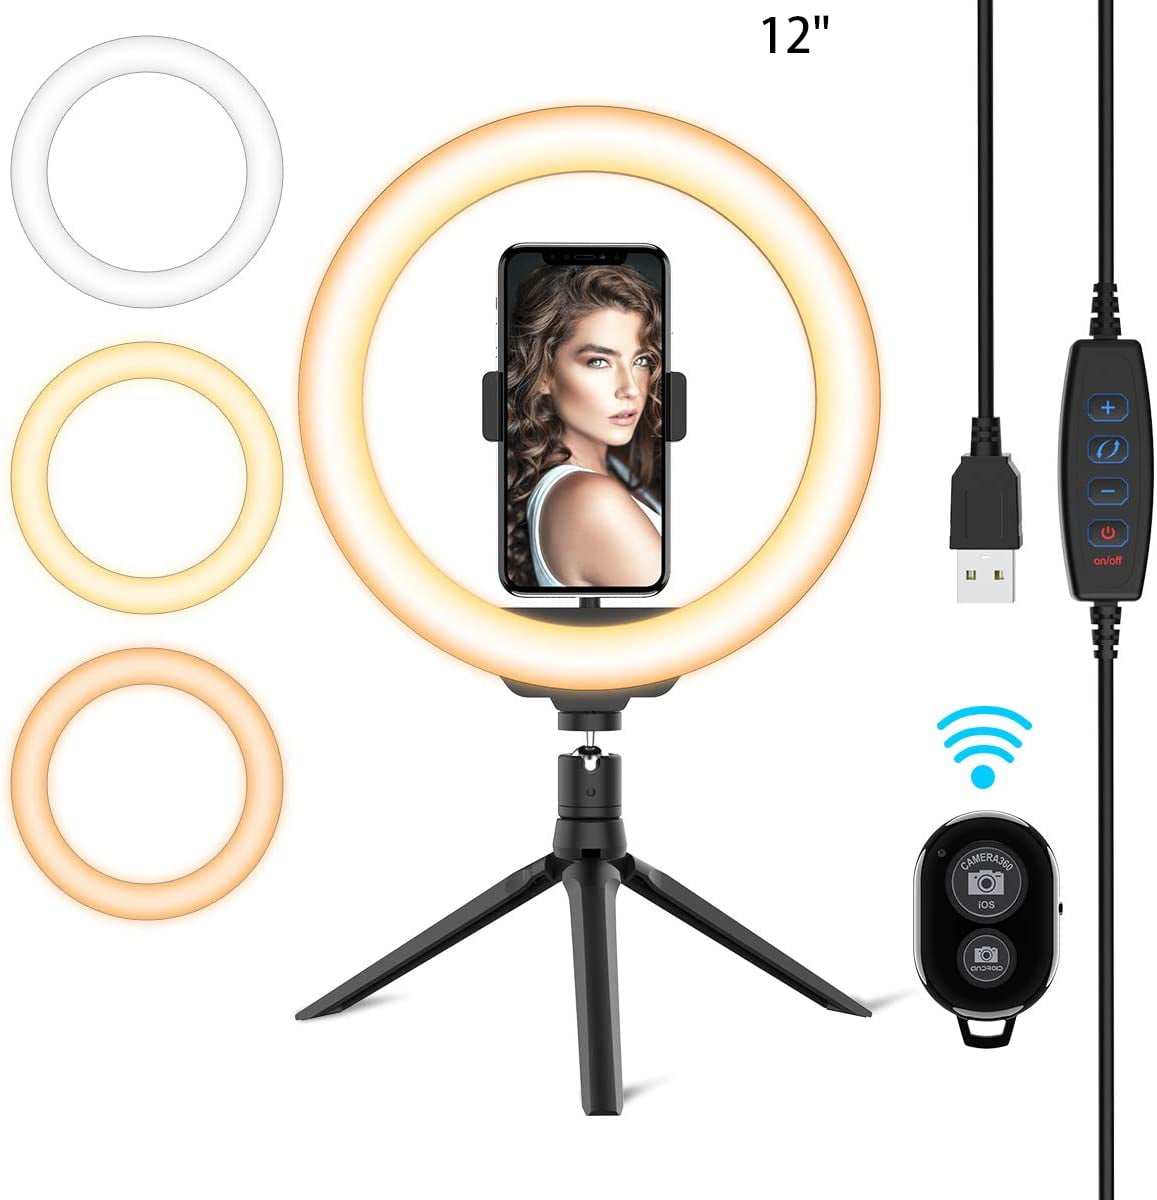 Compatible with iPhone/Android 5 Desktop Selfie Ring Light with Tripod Stand & Cell Phone Holder 3 Light Modes Double LED Ring Light for YouTube Video/TikTok/Live Stream/Makeup/Photography 